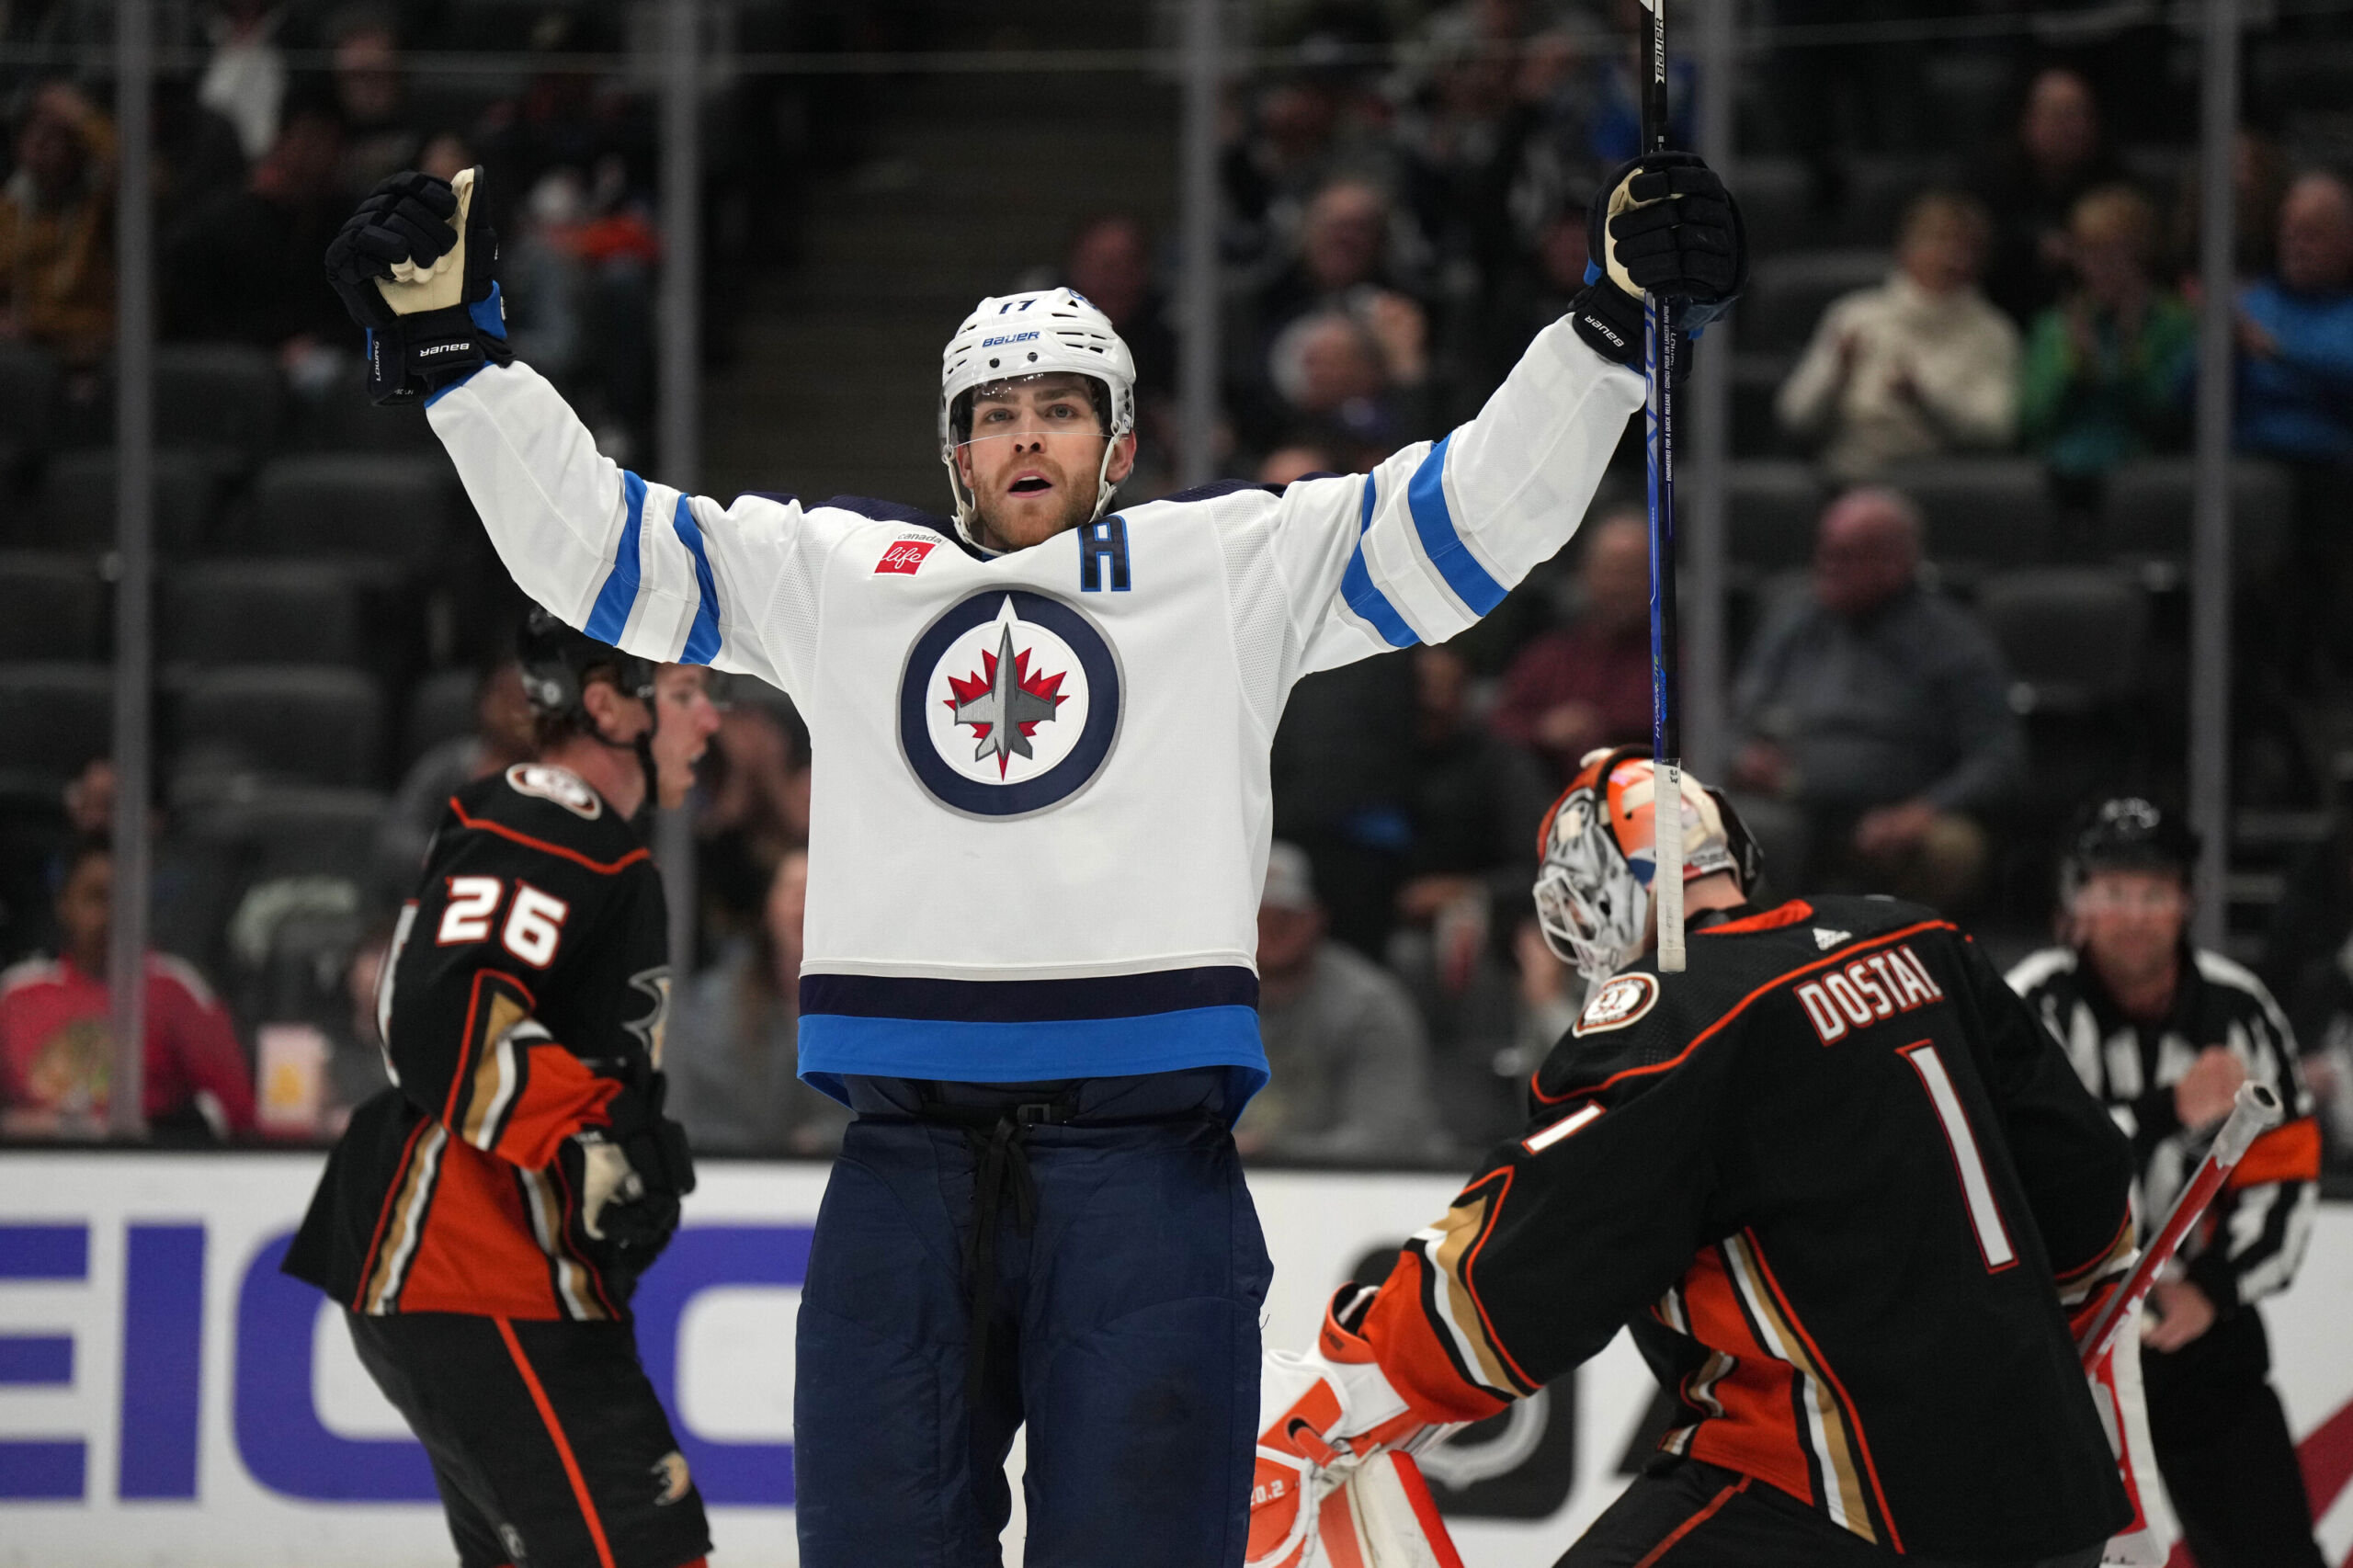 Reaction: Adam Lowry named Captain of the Winnipeg Jets - was he